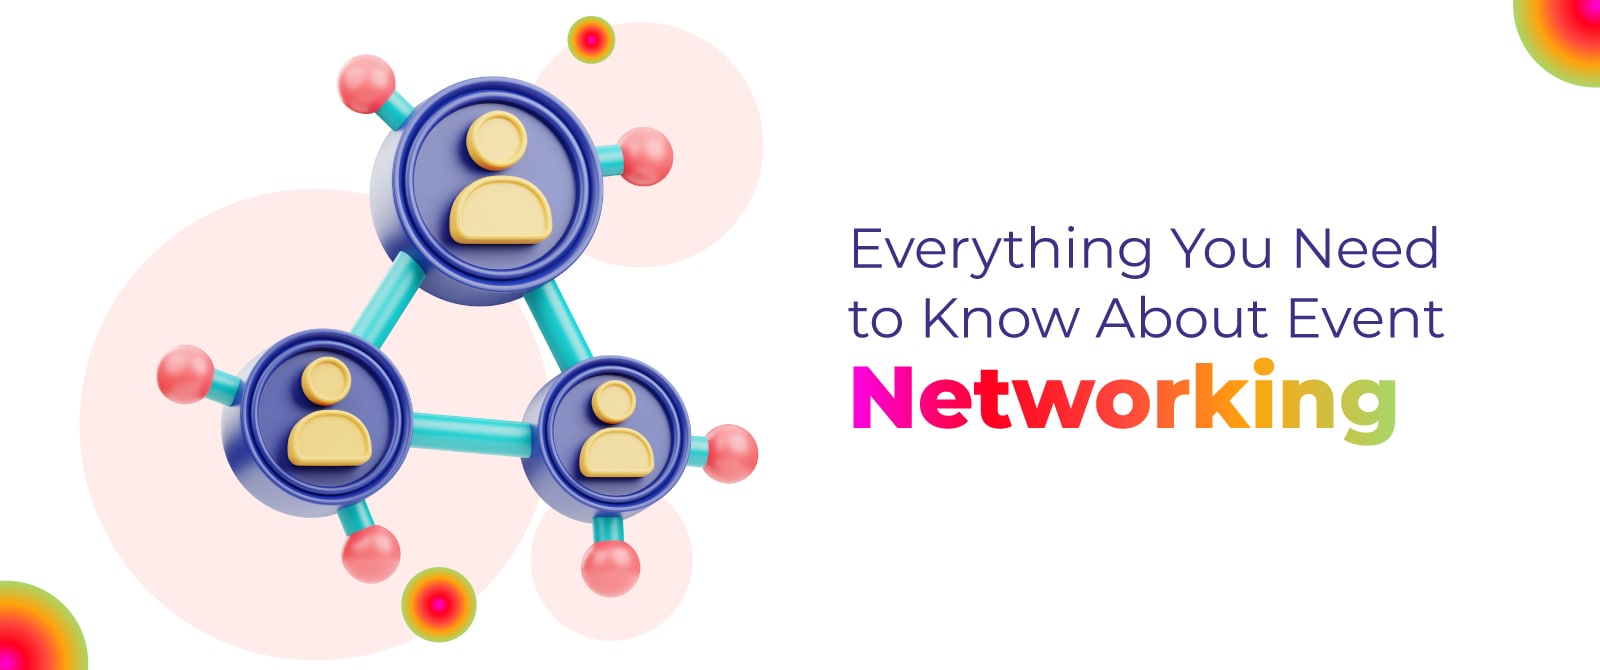 Everything You Need to Know About Event Networking